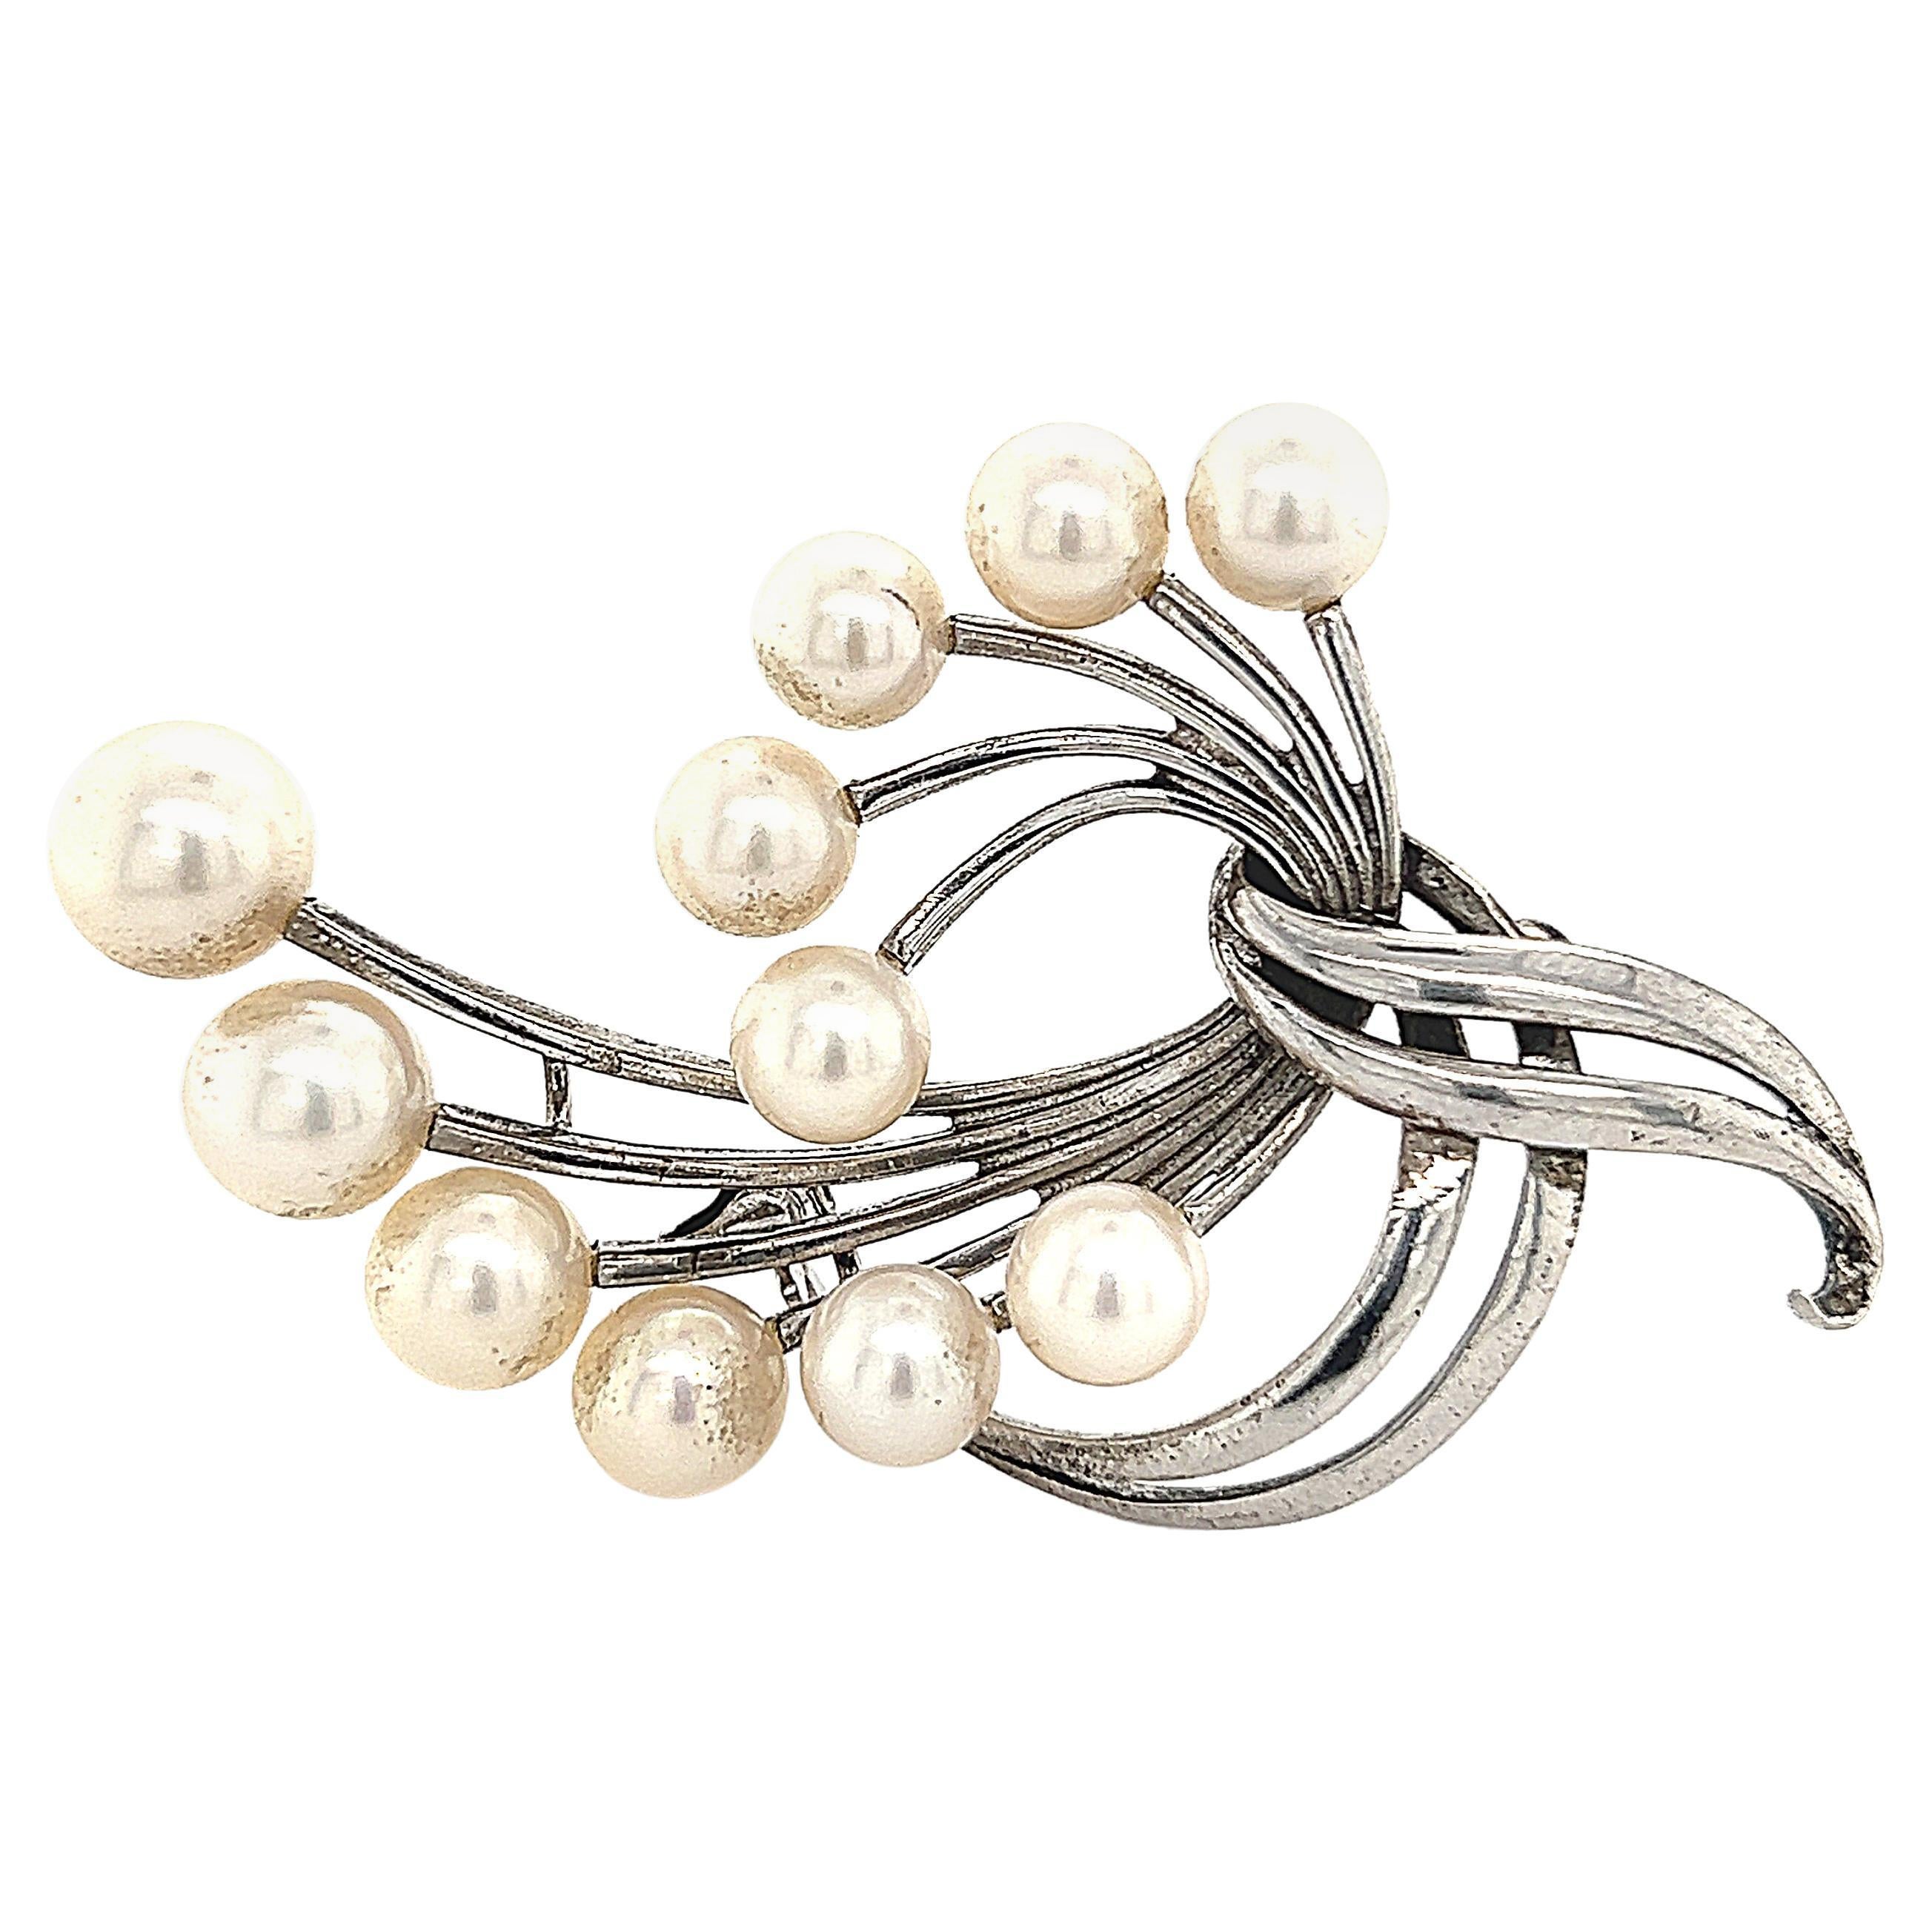 Mikimoto Estate Akoya Pearl Brooch Sterling Silver 6.6 mm 10.3g For Sale